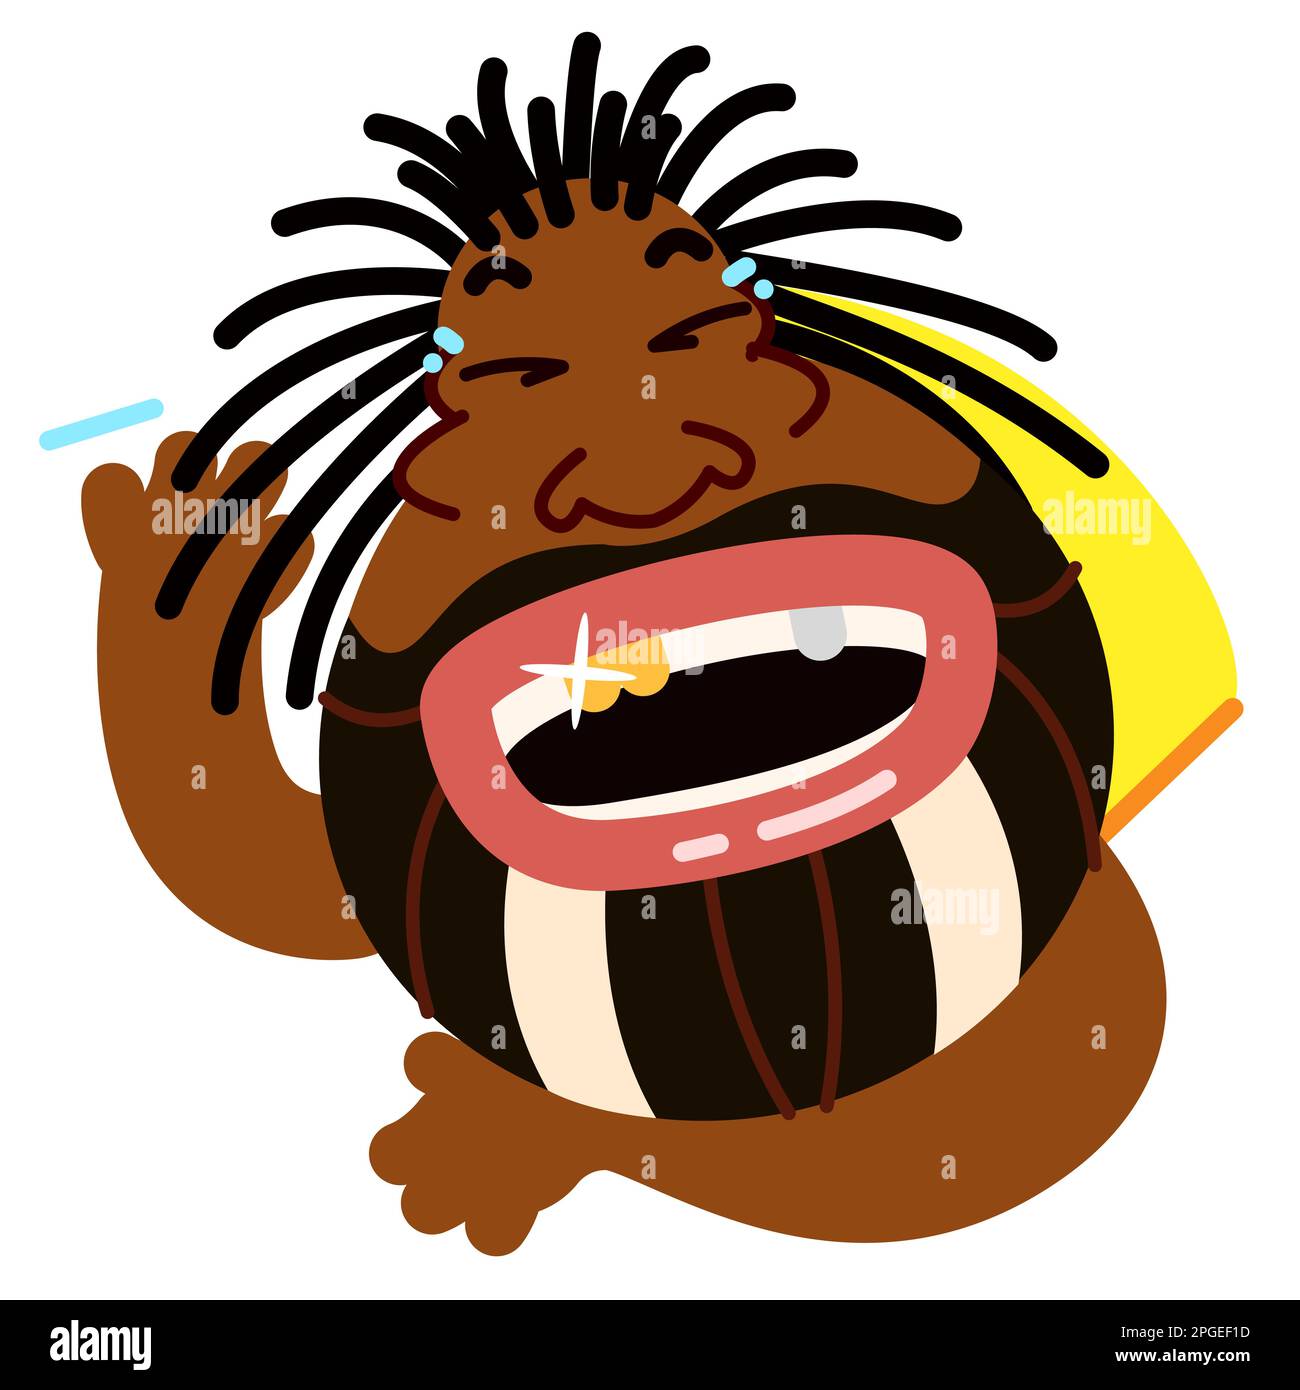 Black bearded man laughs to tears while lying on the floor. The concept of a playful African American with round glasses and dreadlocks. Vector stock Stock Vector